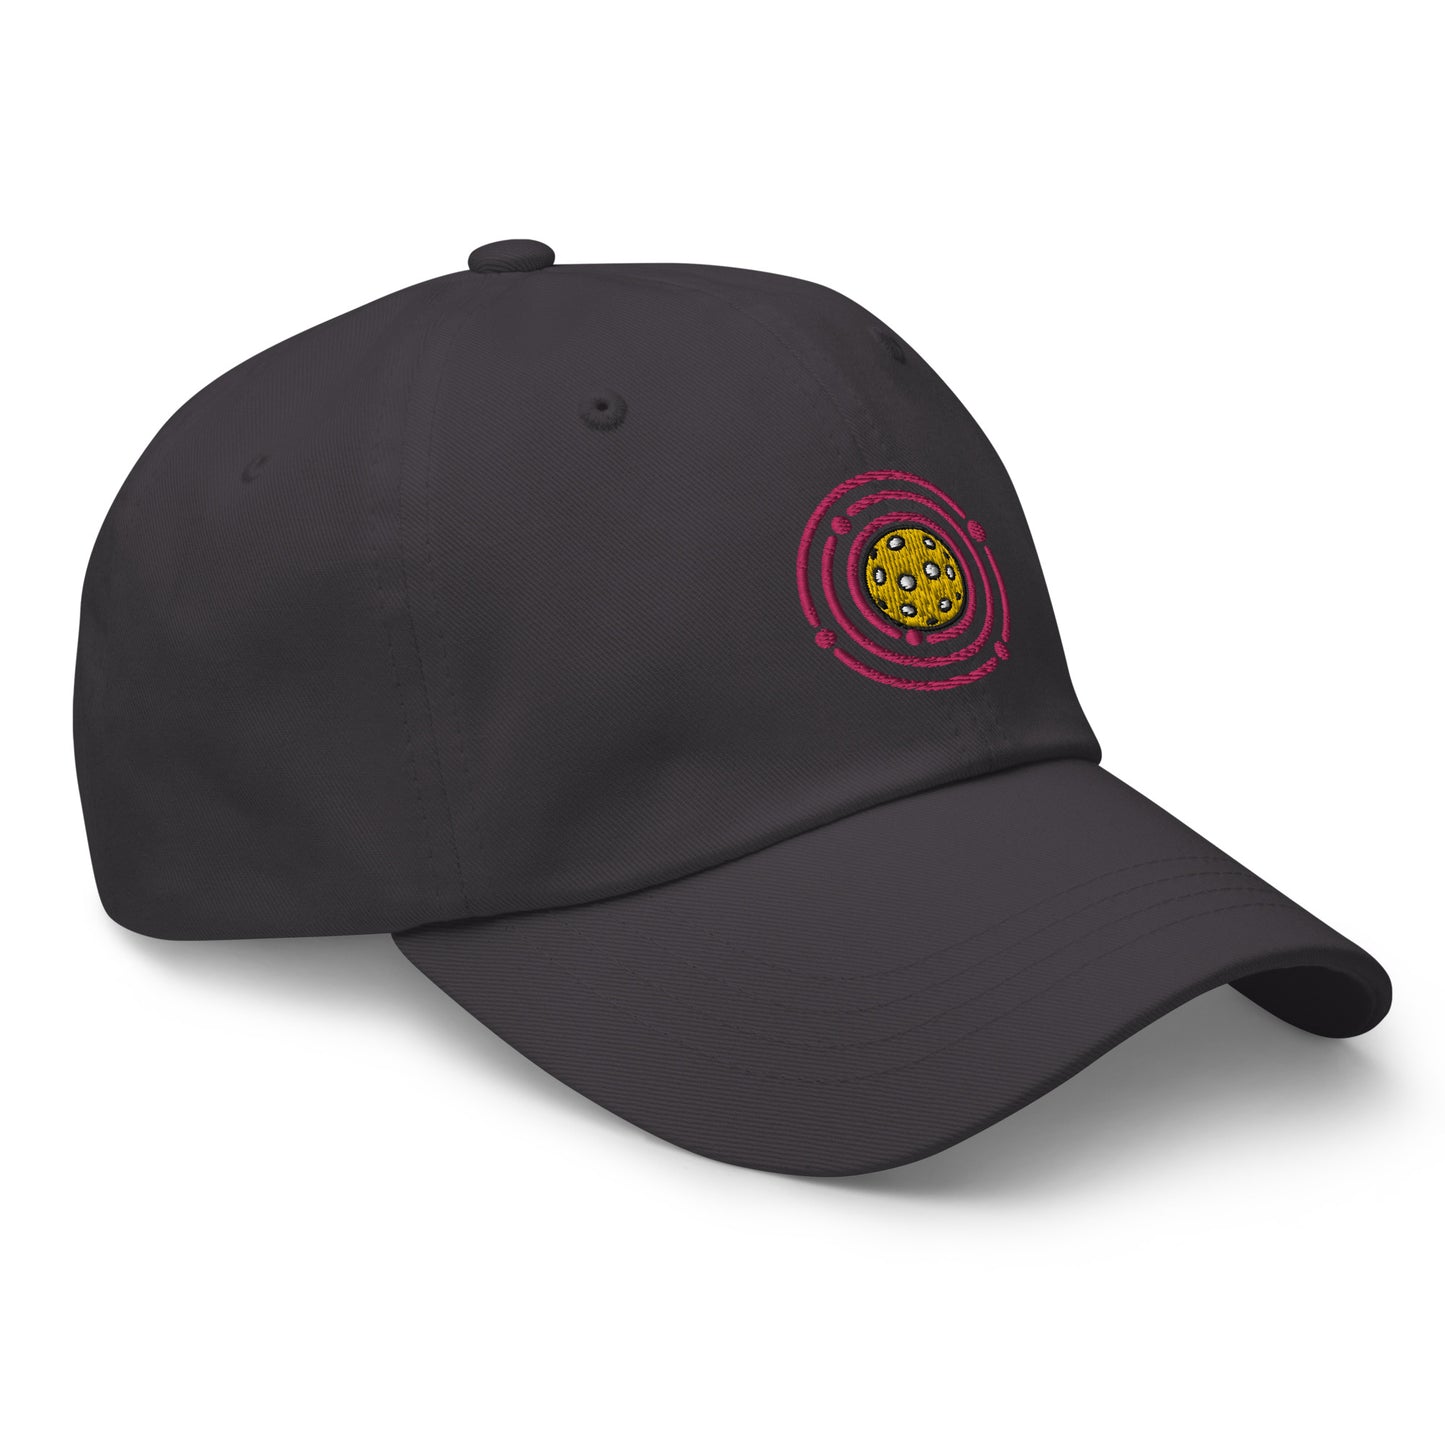 Cotton Twill Classic Cap: Embroidered Hat Pickleball Orbit Pink (more colors)